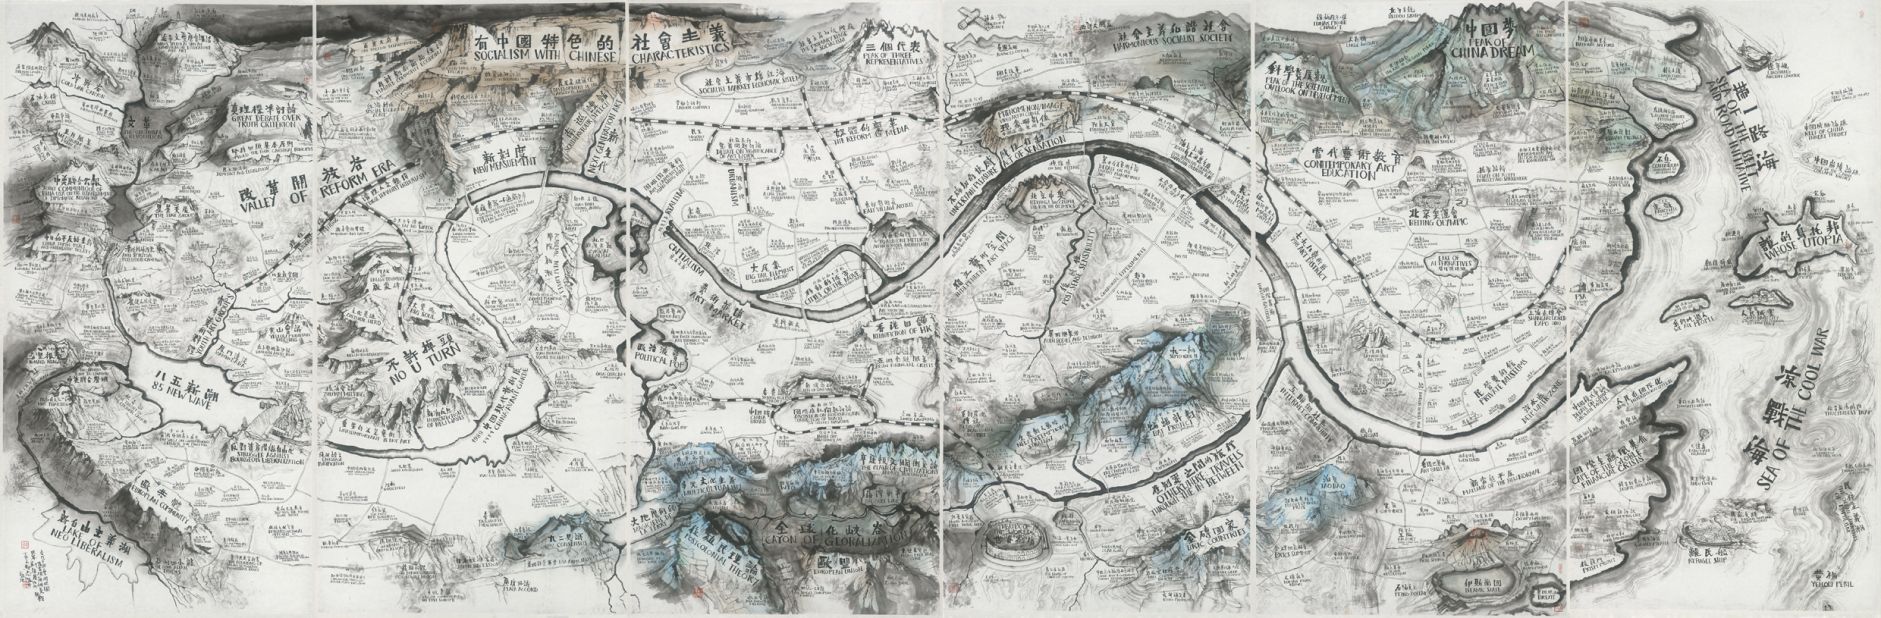 For Beijing-based artist Qiu Zhijie, maps are less about the physical geography of a space than the relationships of complex, often intangible subjects.